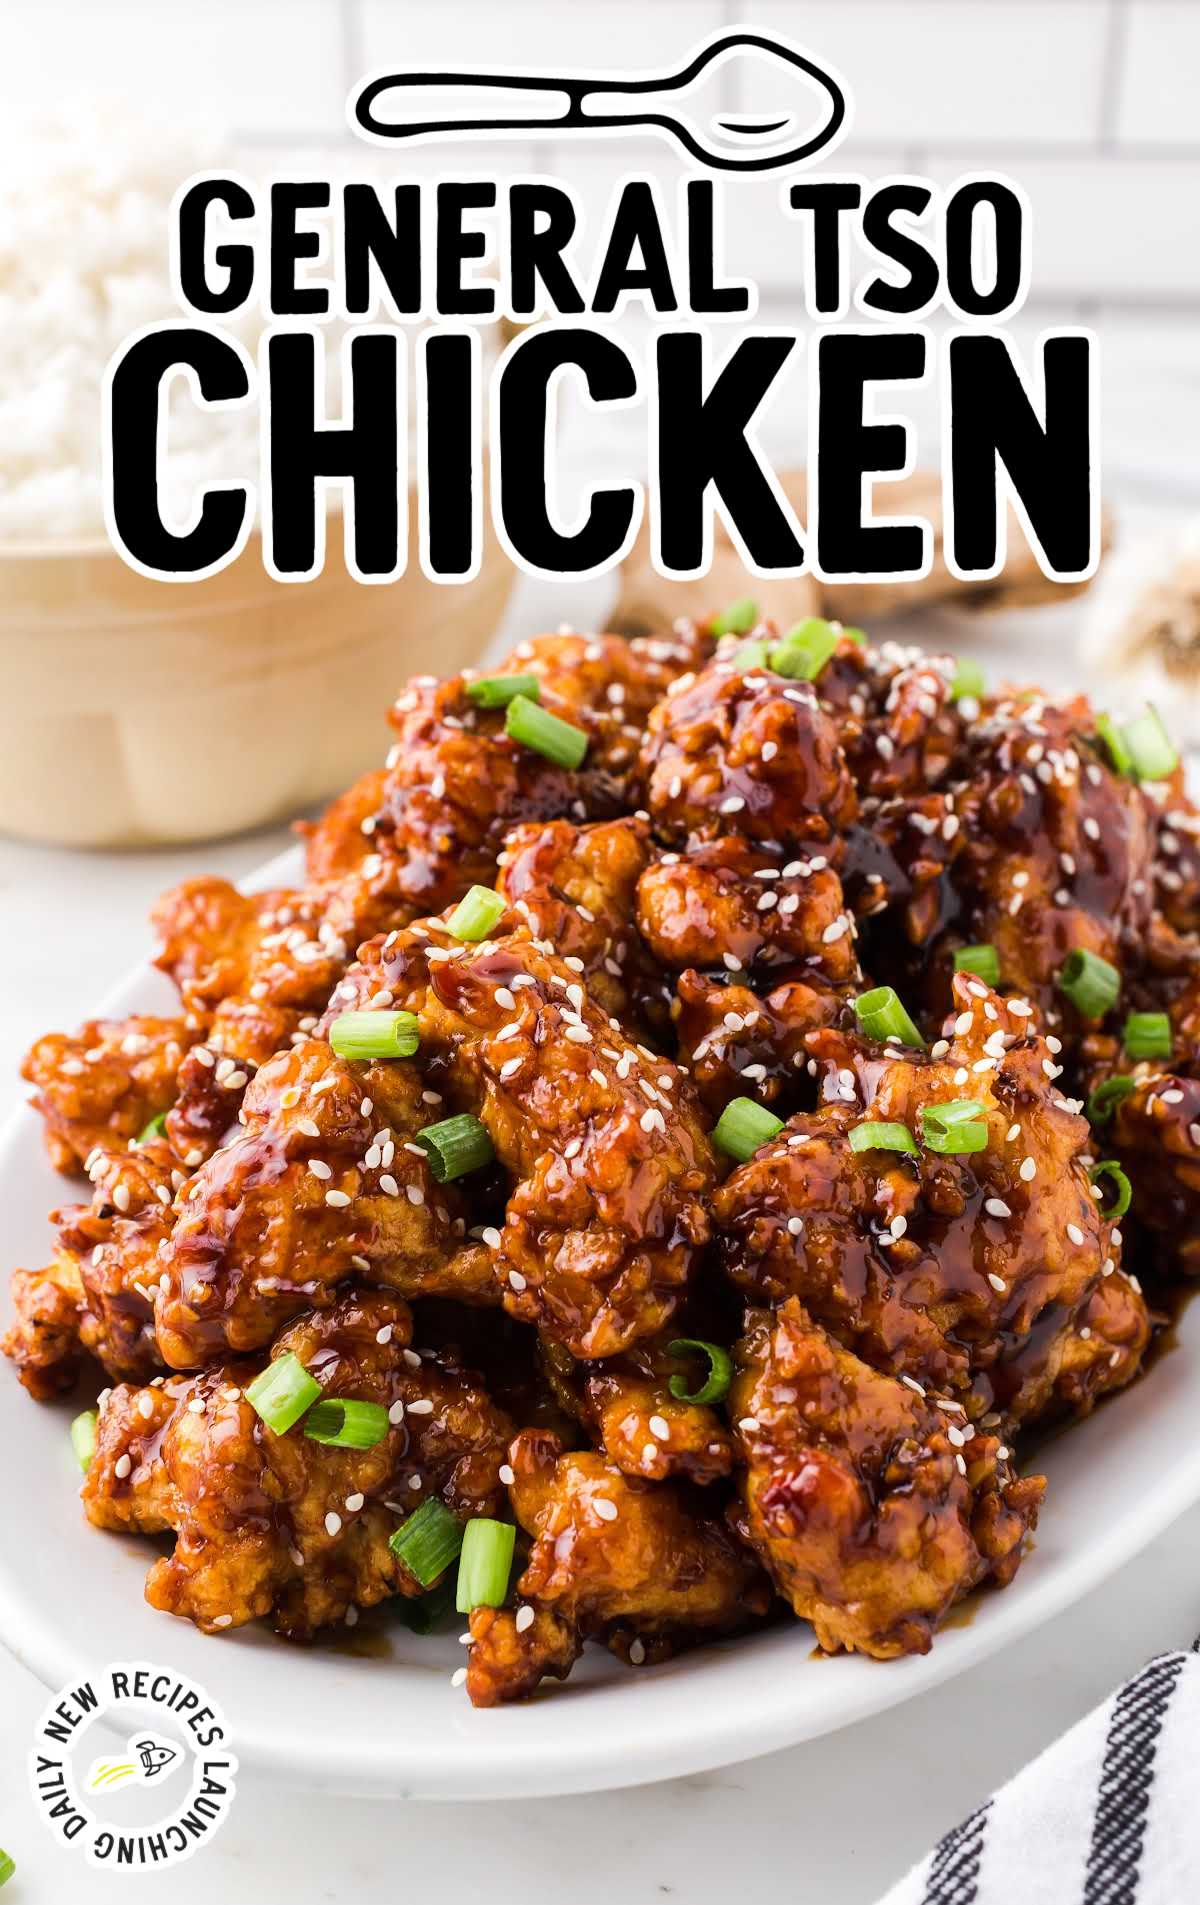 close up shot of a plate of fried chicken garnished with sesame seeds and green onions